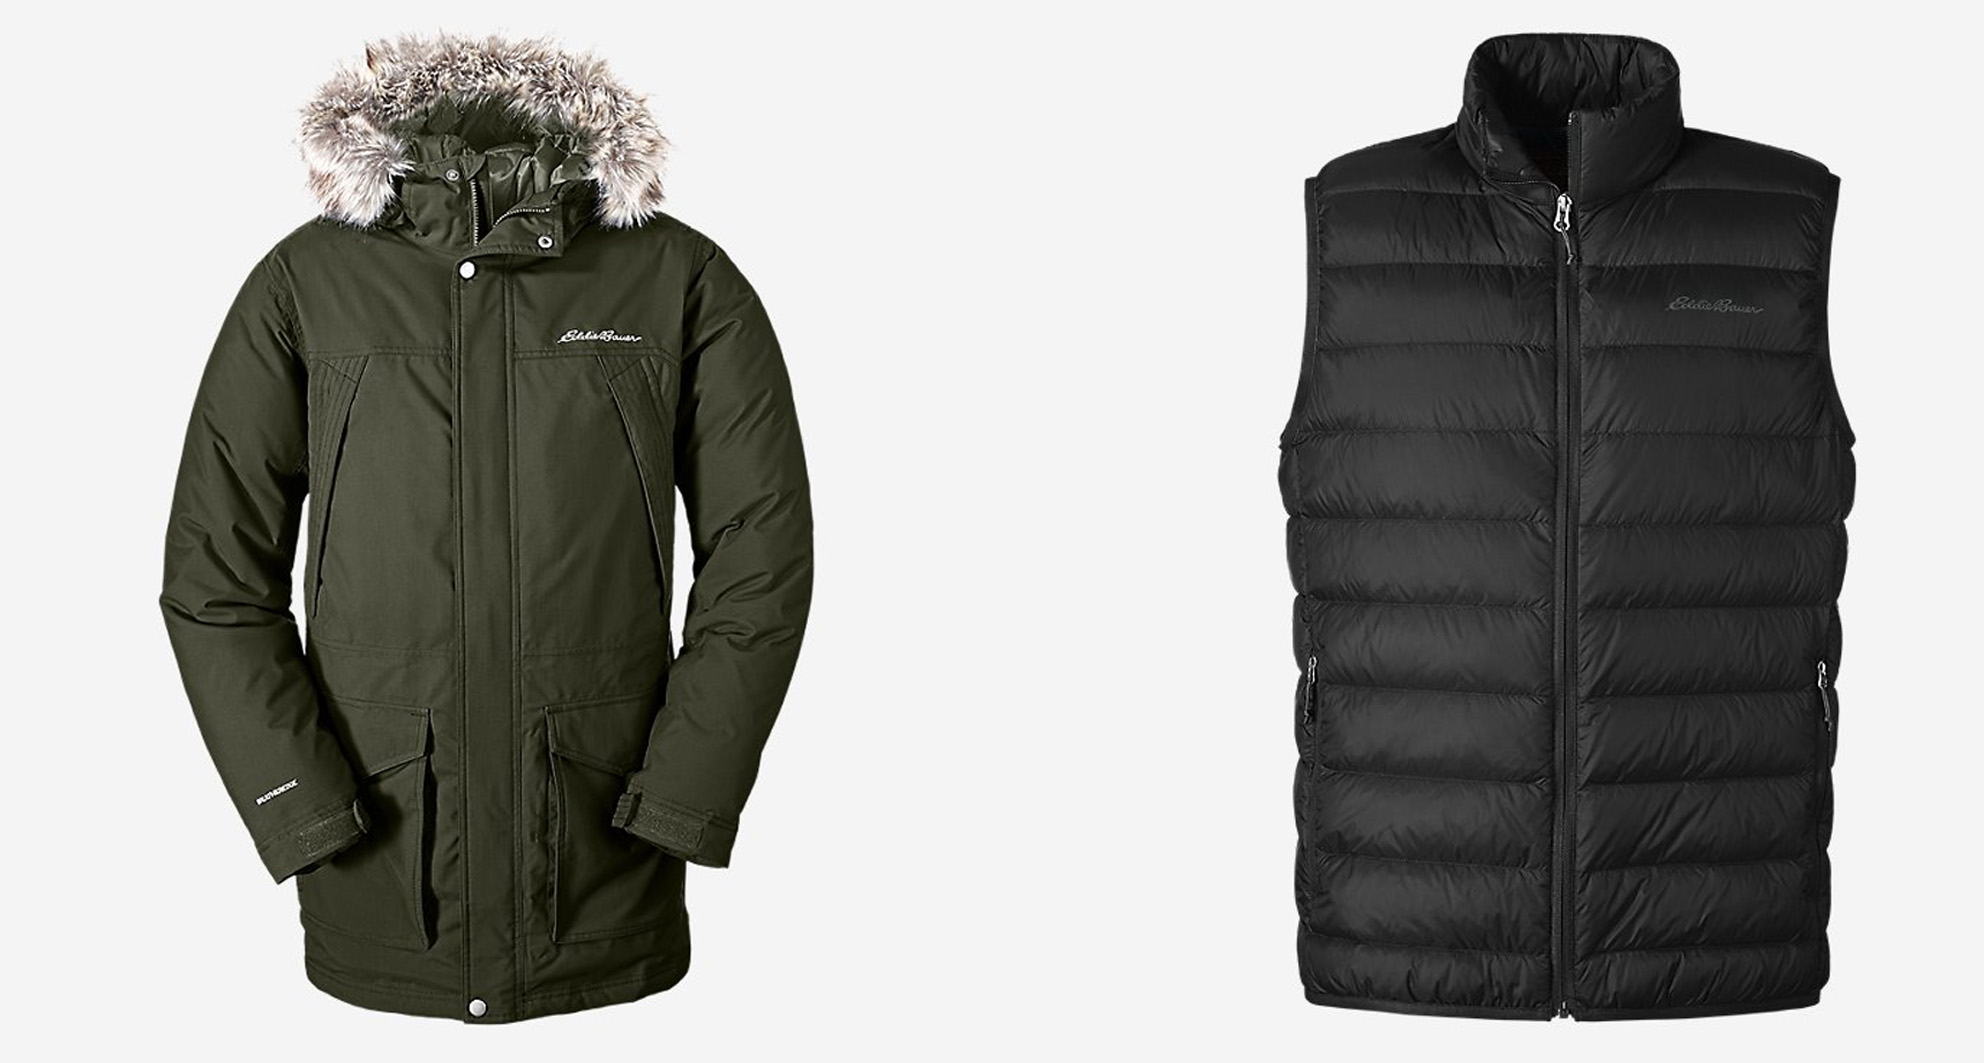 Eddie Bauer's Clearance Event offers down parkas from $72, vests at $20 ...